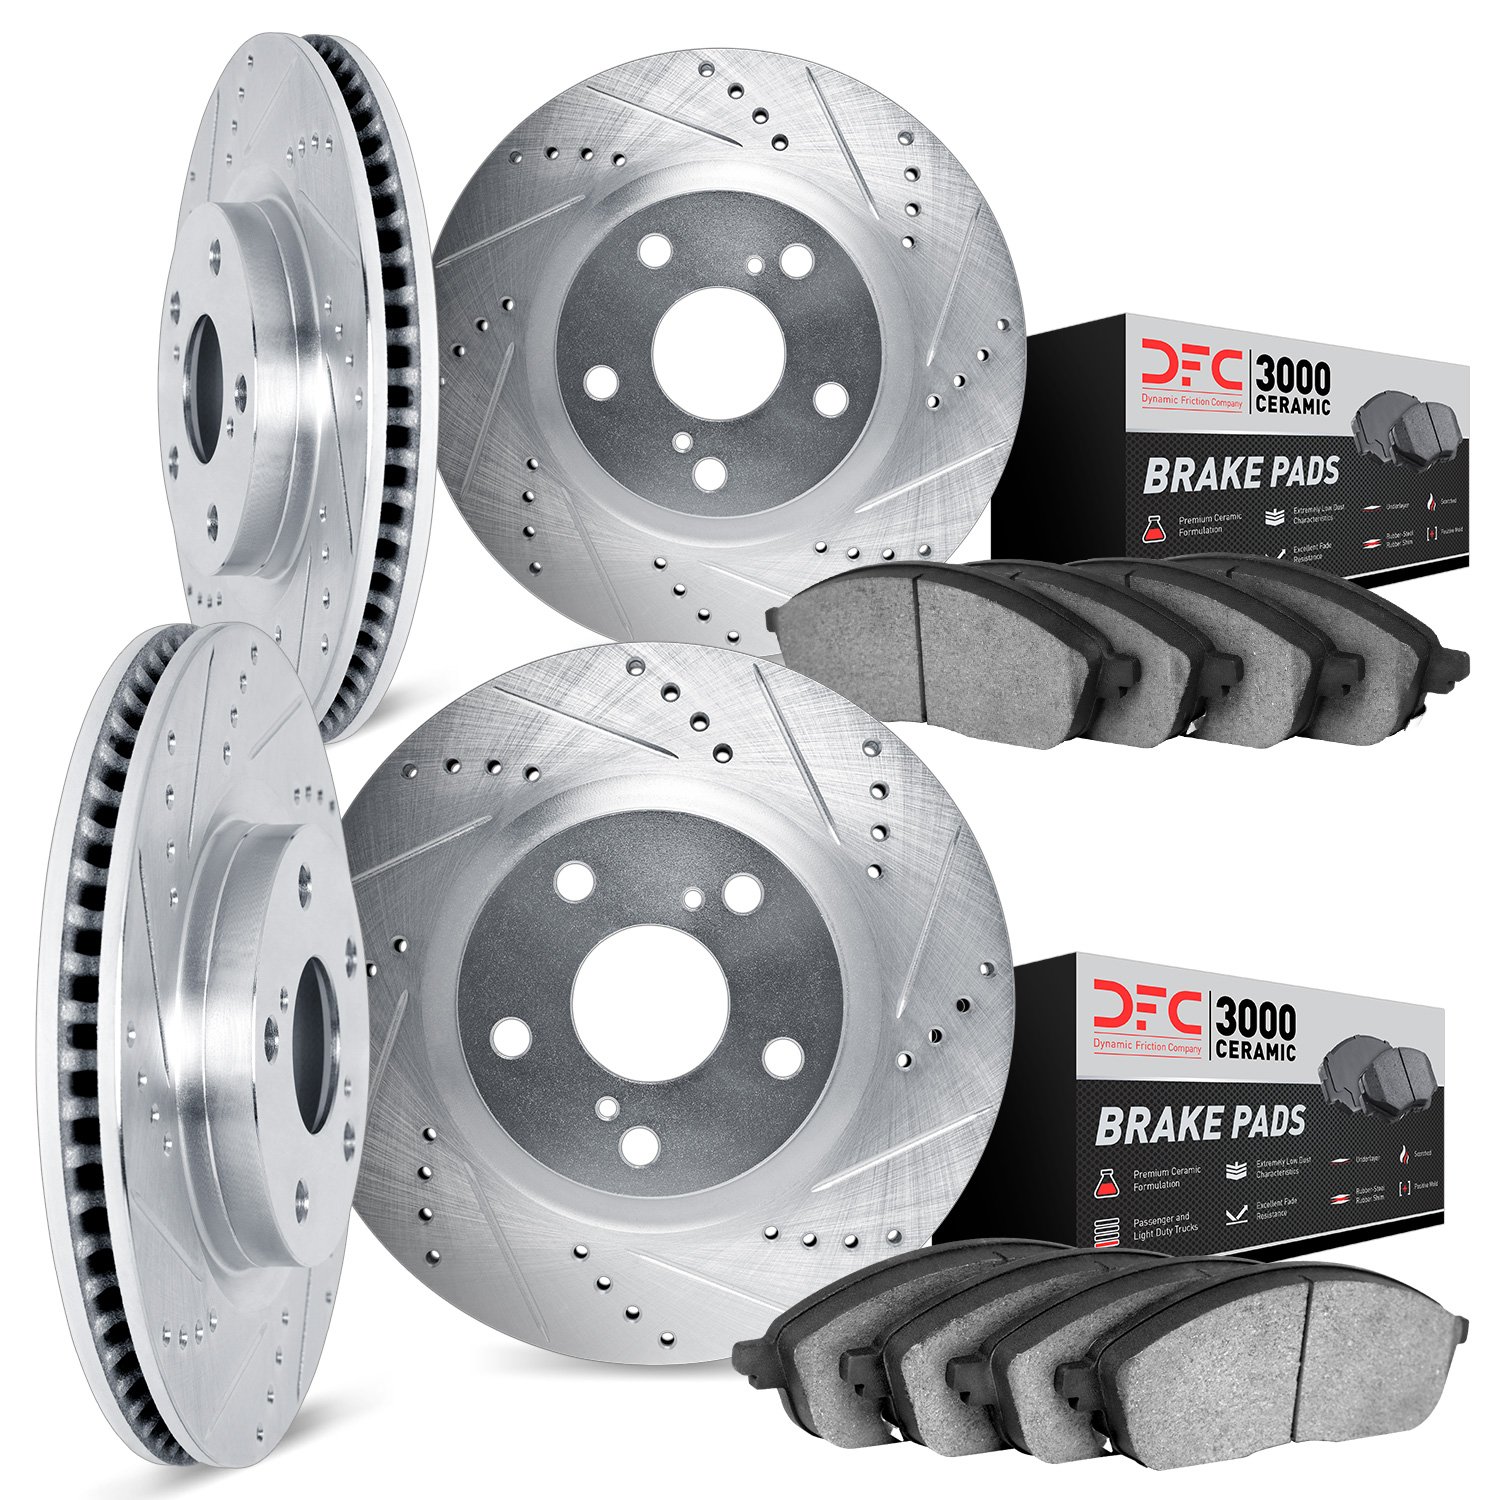 7304-54088 Drilled/Slotted Brake Rotor with 3000-Series Ceramic Brake Pads Kit [Silver], 2005-2010 Ford/Lincoln/Mercury/Mazda, P